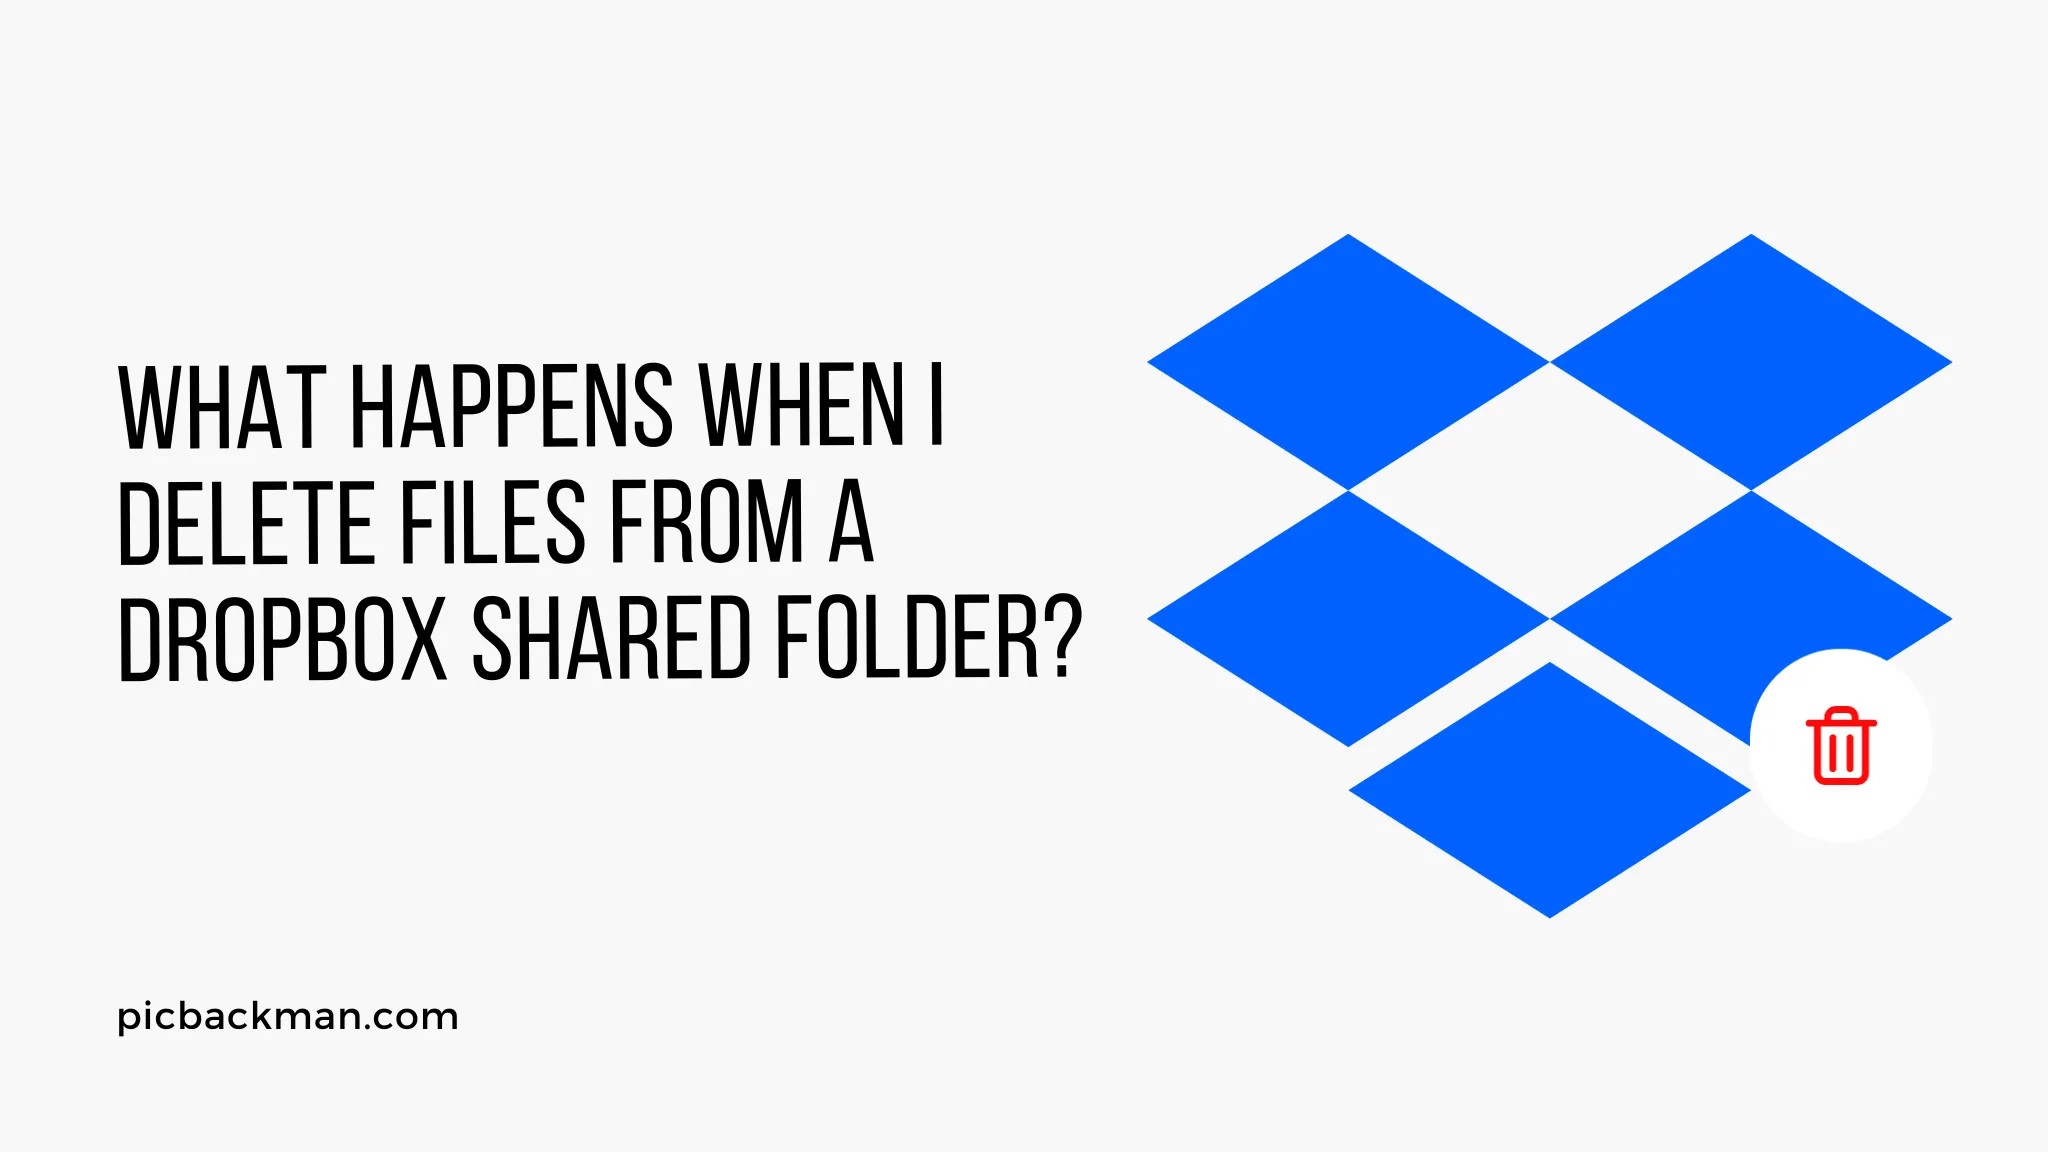 What happens when I Delete Files from a Dropbox Shared Folder?